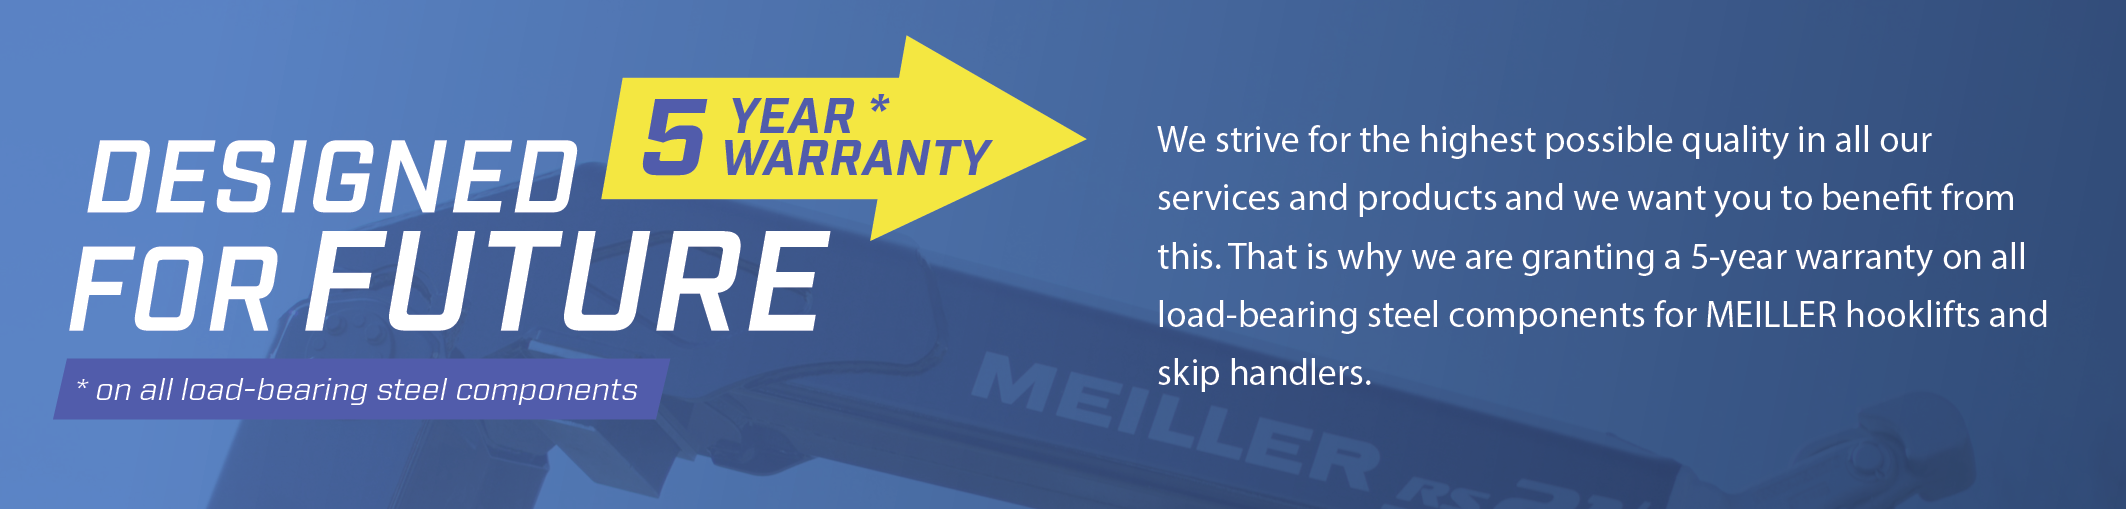 We strive for the highest possible quality in all our services and products and we want you to benefit from this. That is why we are granting a 5-year warranty on all load-bearing steel components for MEILLER hooklifts and skip handlers.